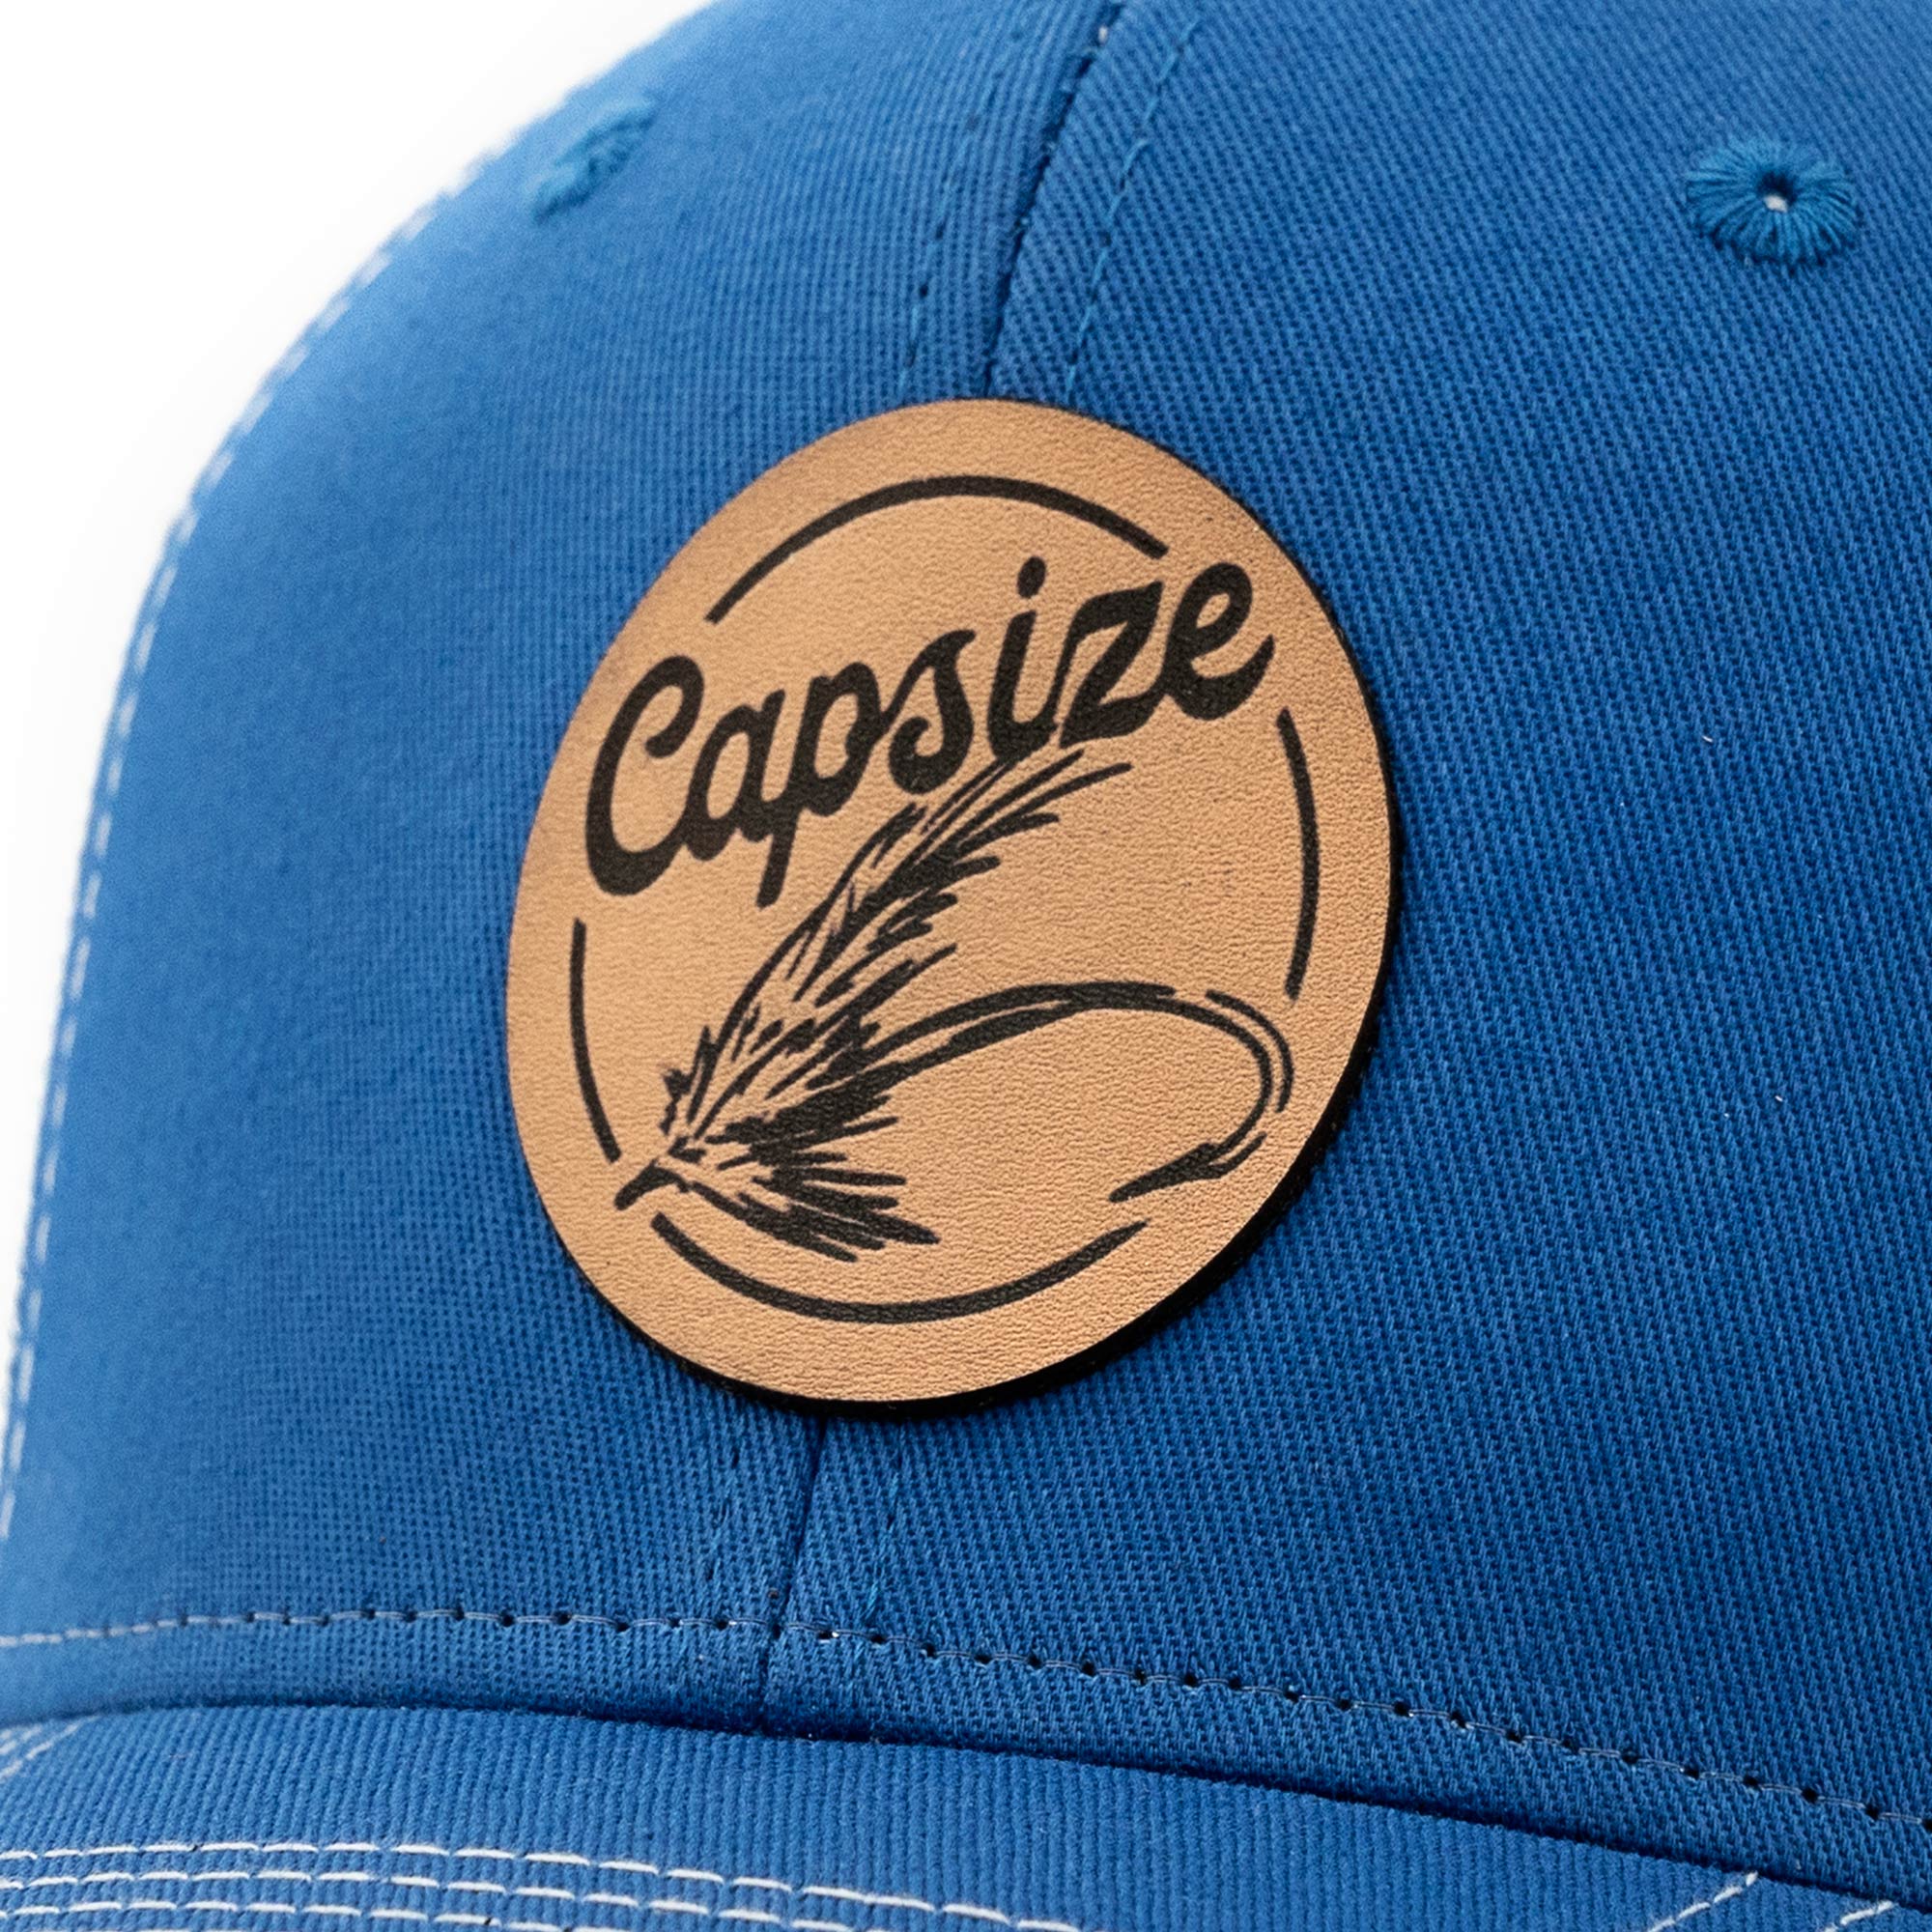 Kid Fishing Hat | Leather Fly Trucker - Capsize Fly Fishing